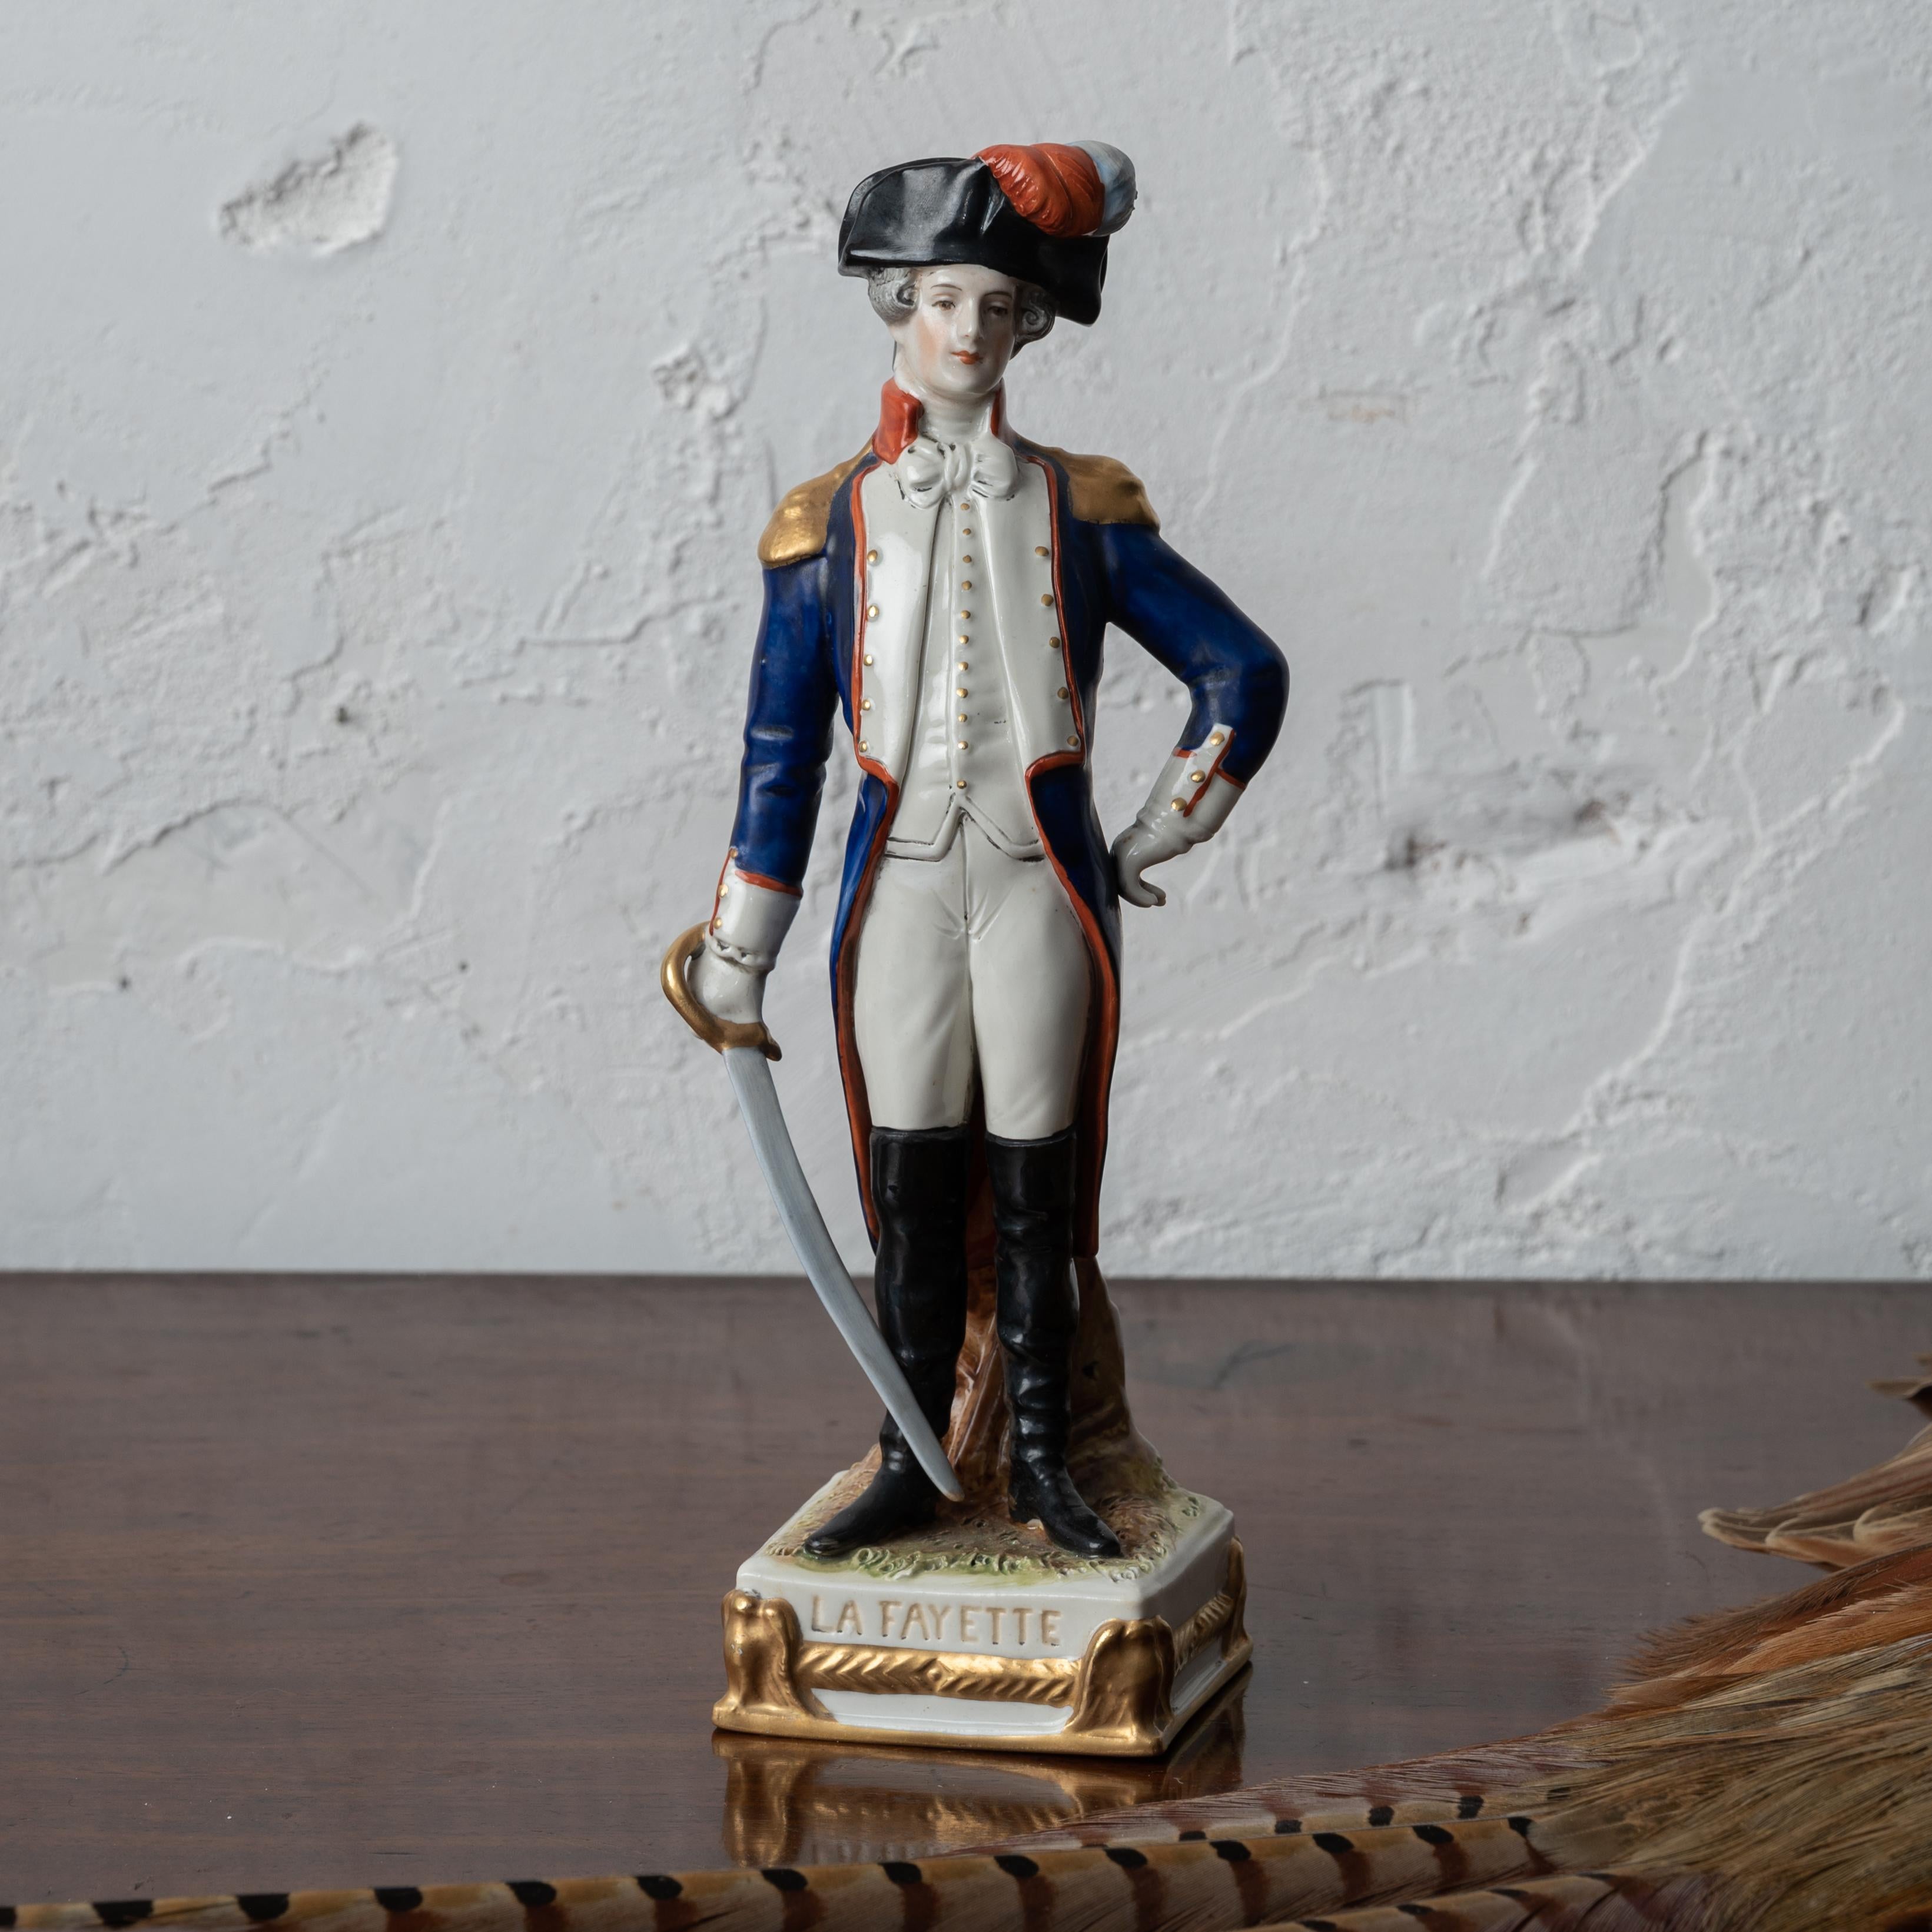 A Scheibe-Alsbach LaFayette porcelain figurine, 20th century.

3 ½ inches wide by 2 ½ inches deep by 9 ½ inches tall

